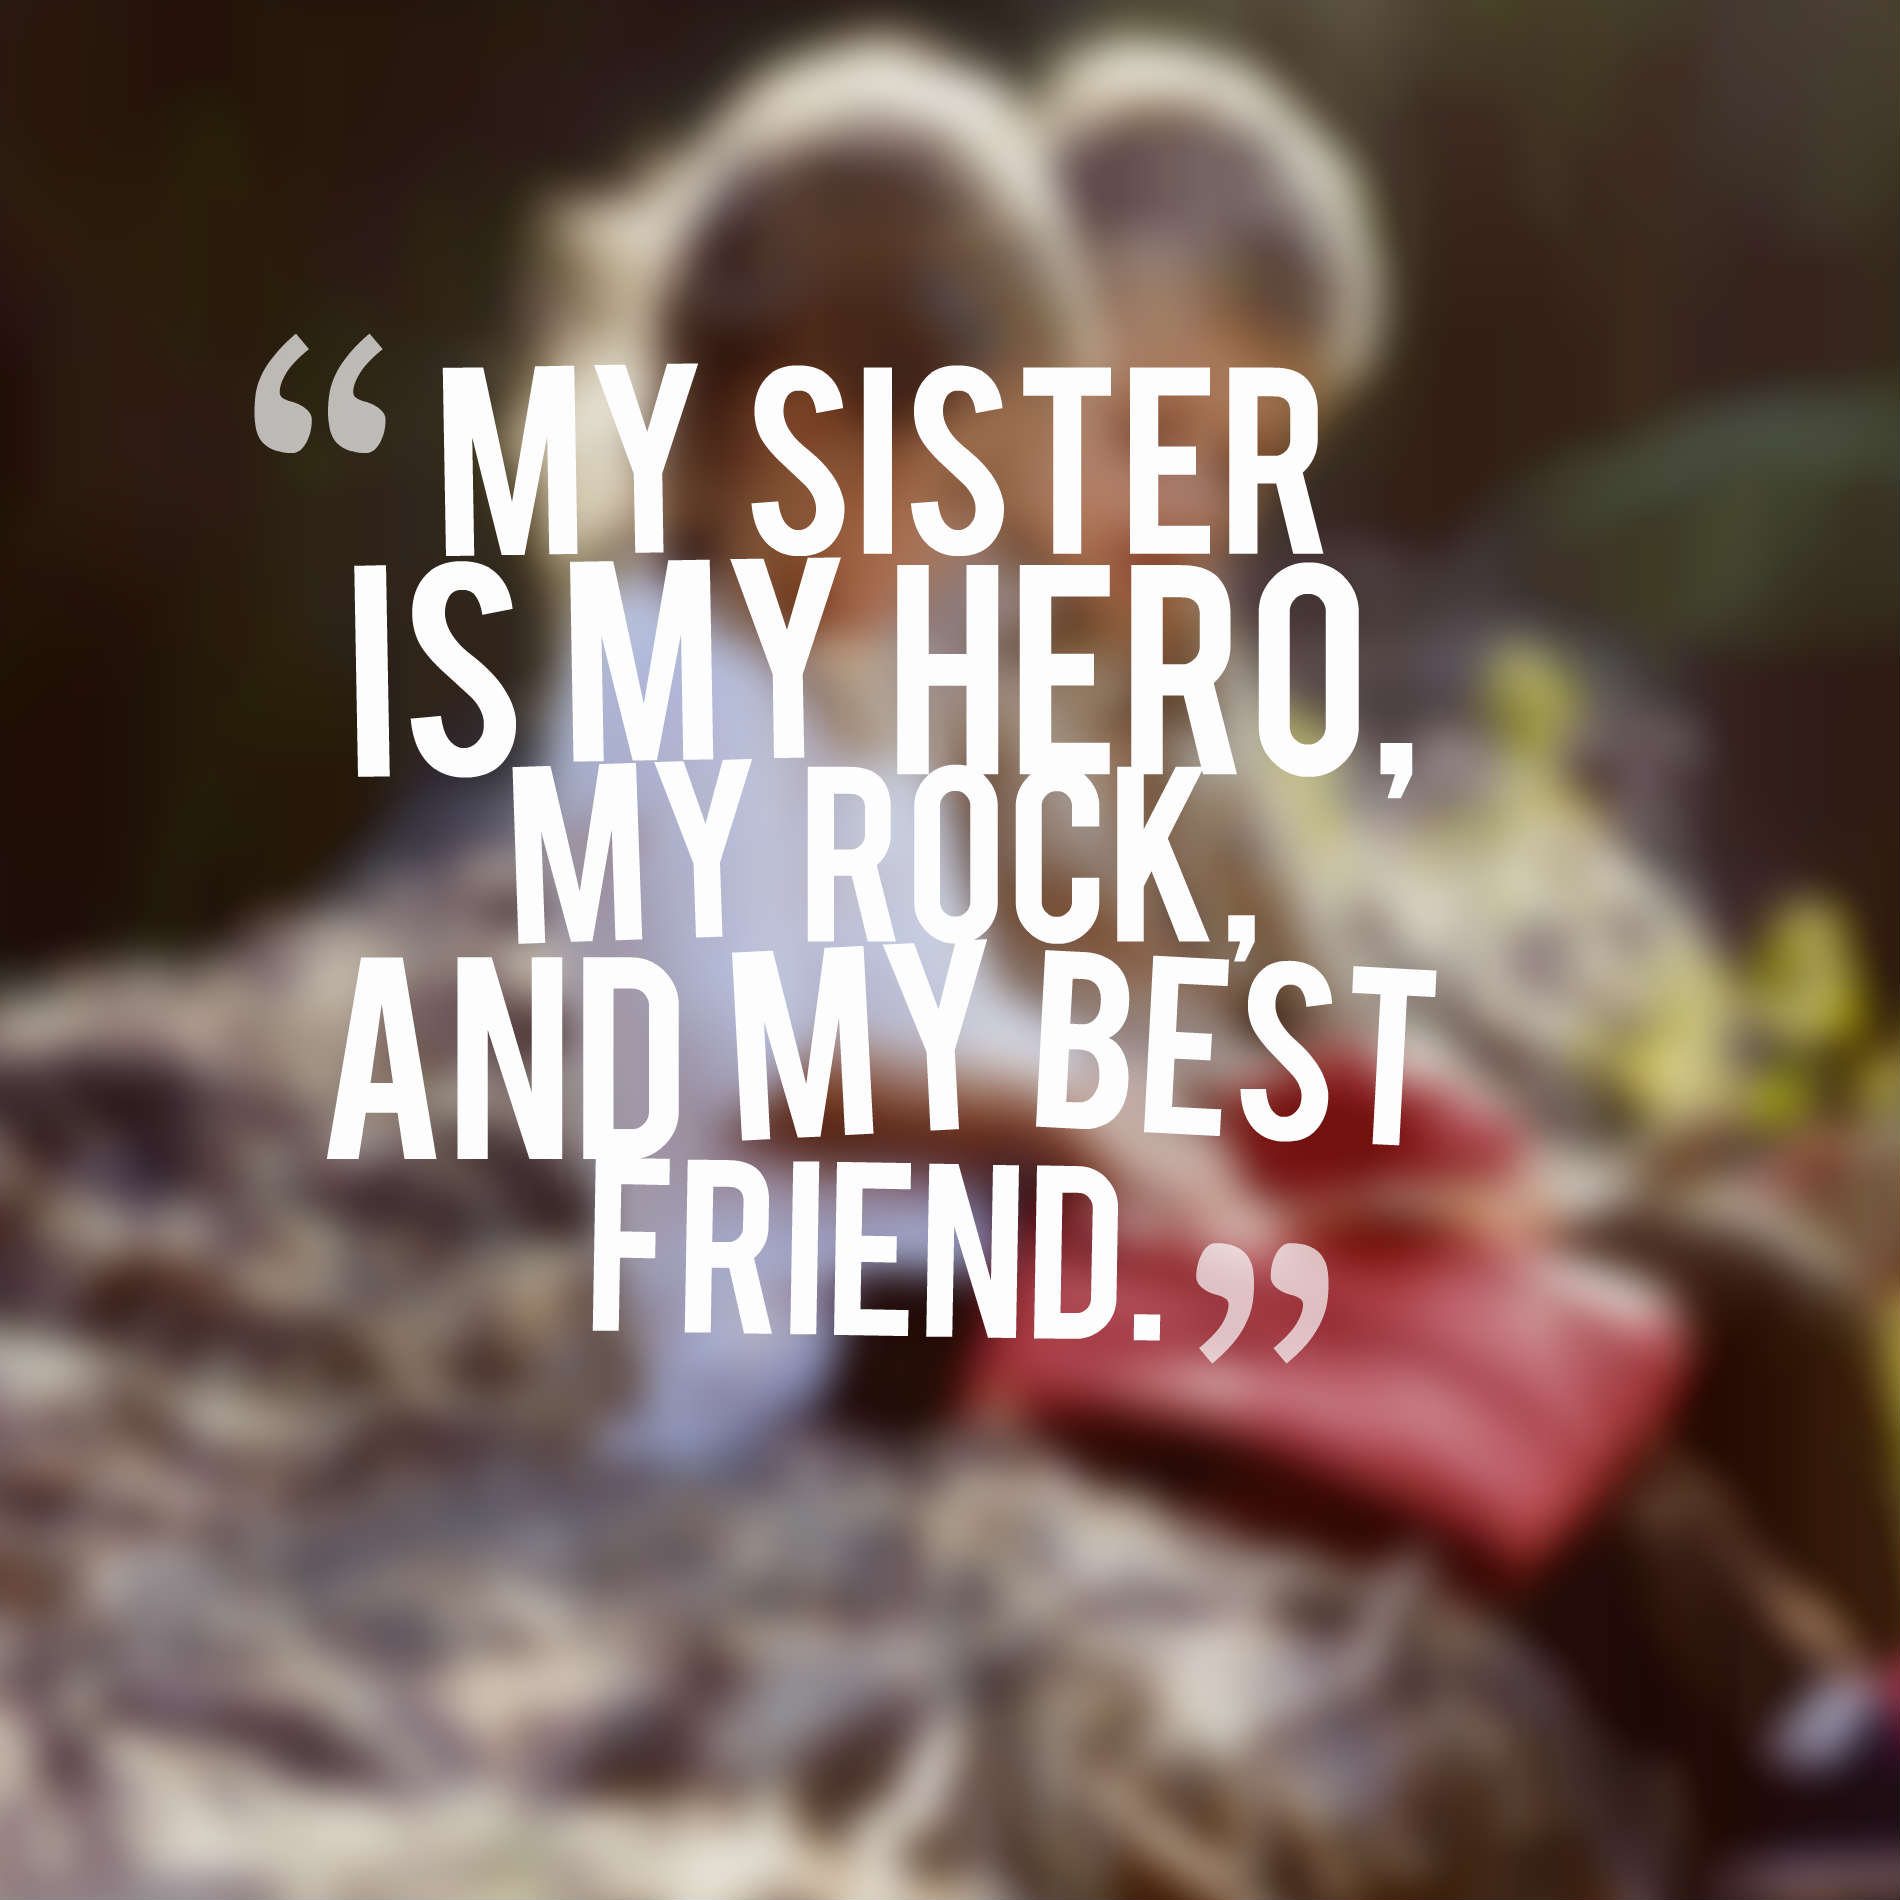 My sister is my hero, my rock, and my best friend.